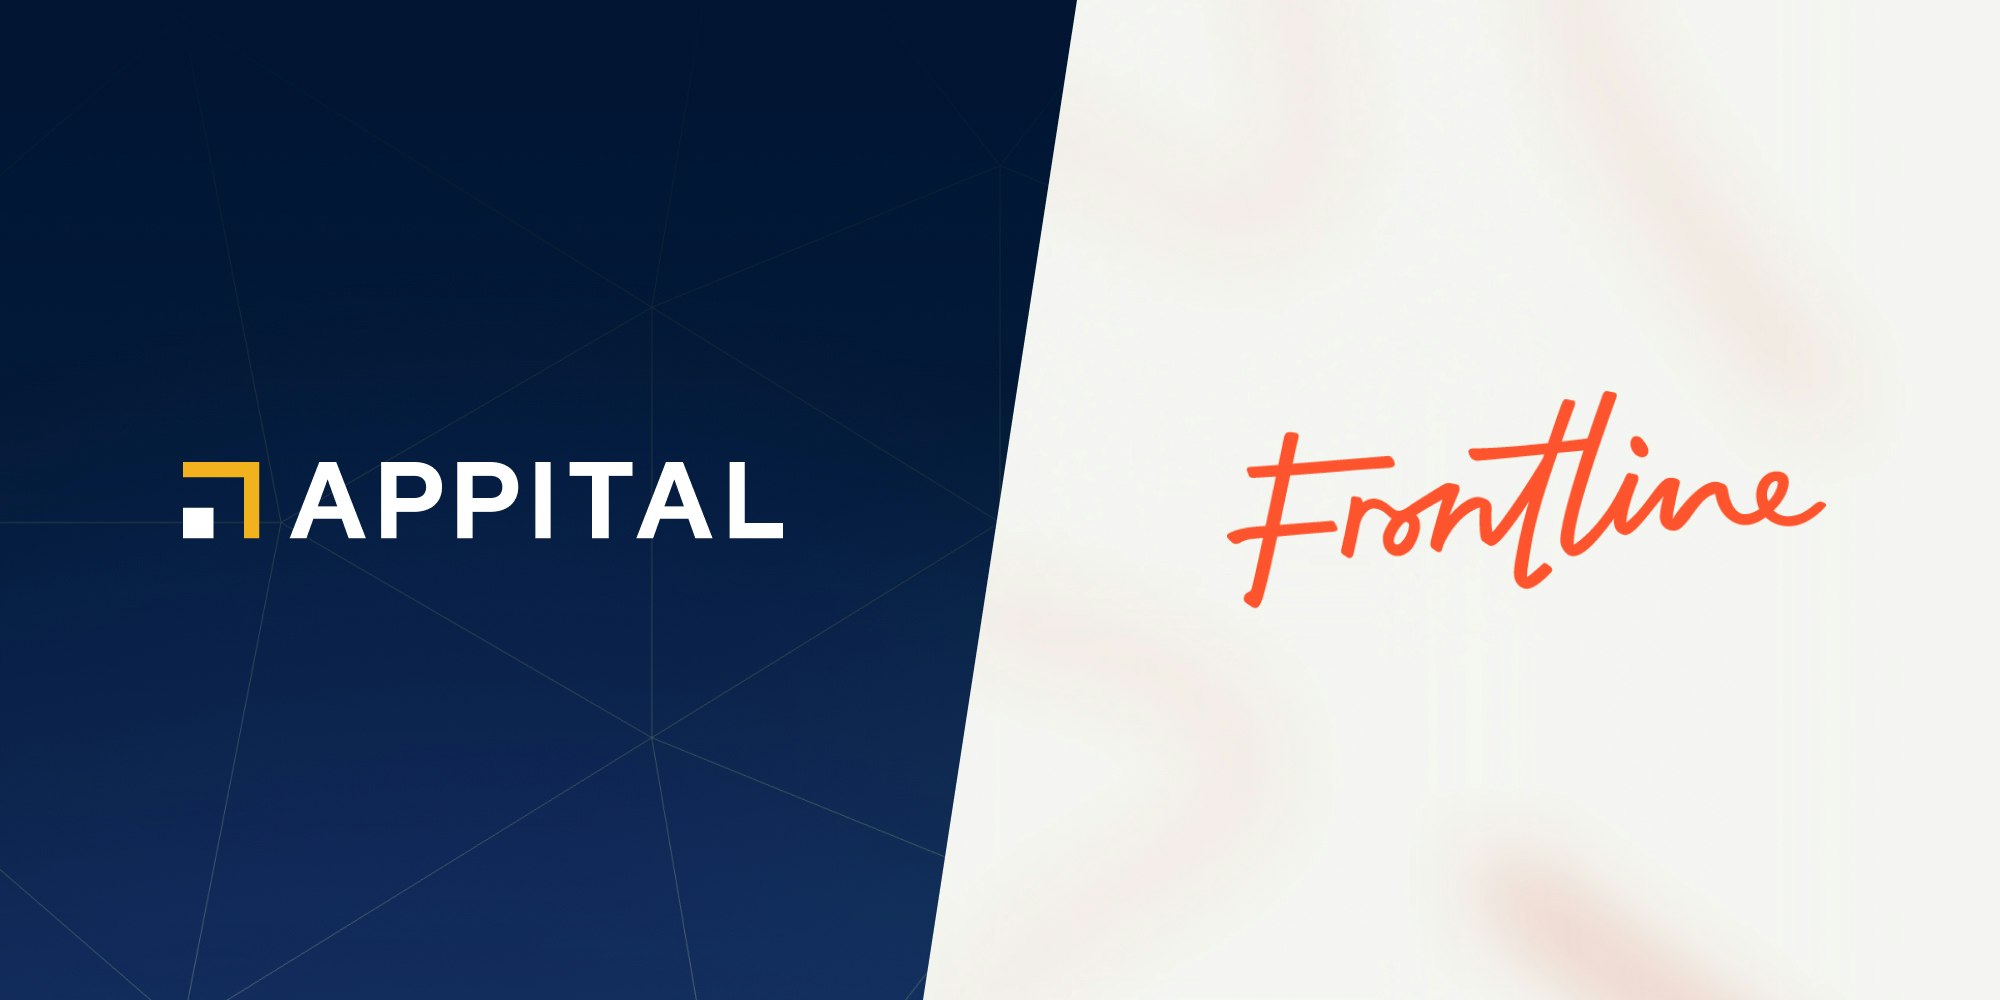 Appital secures additional £1.7 million investment led by Frontline Ventures